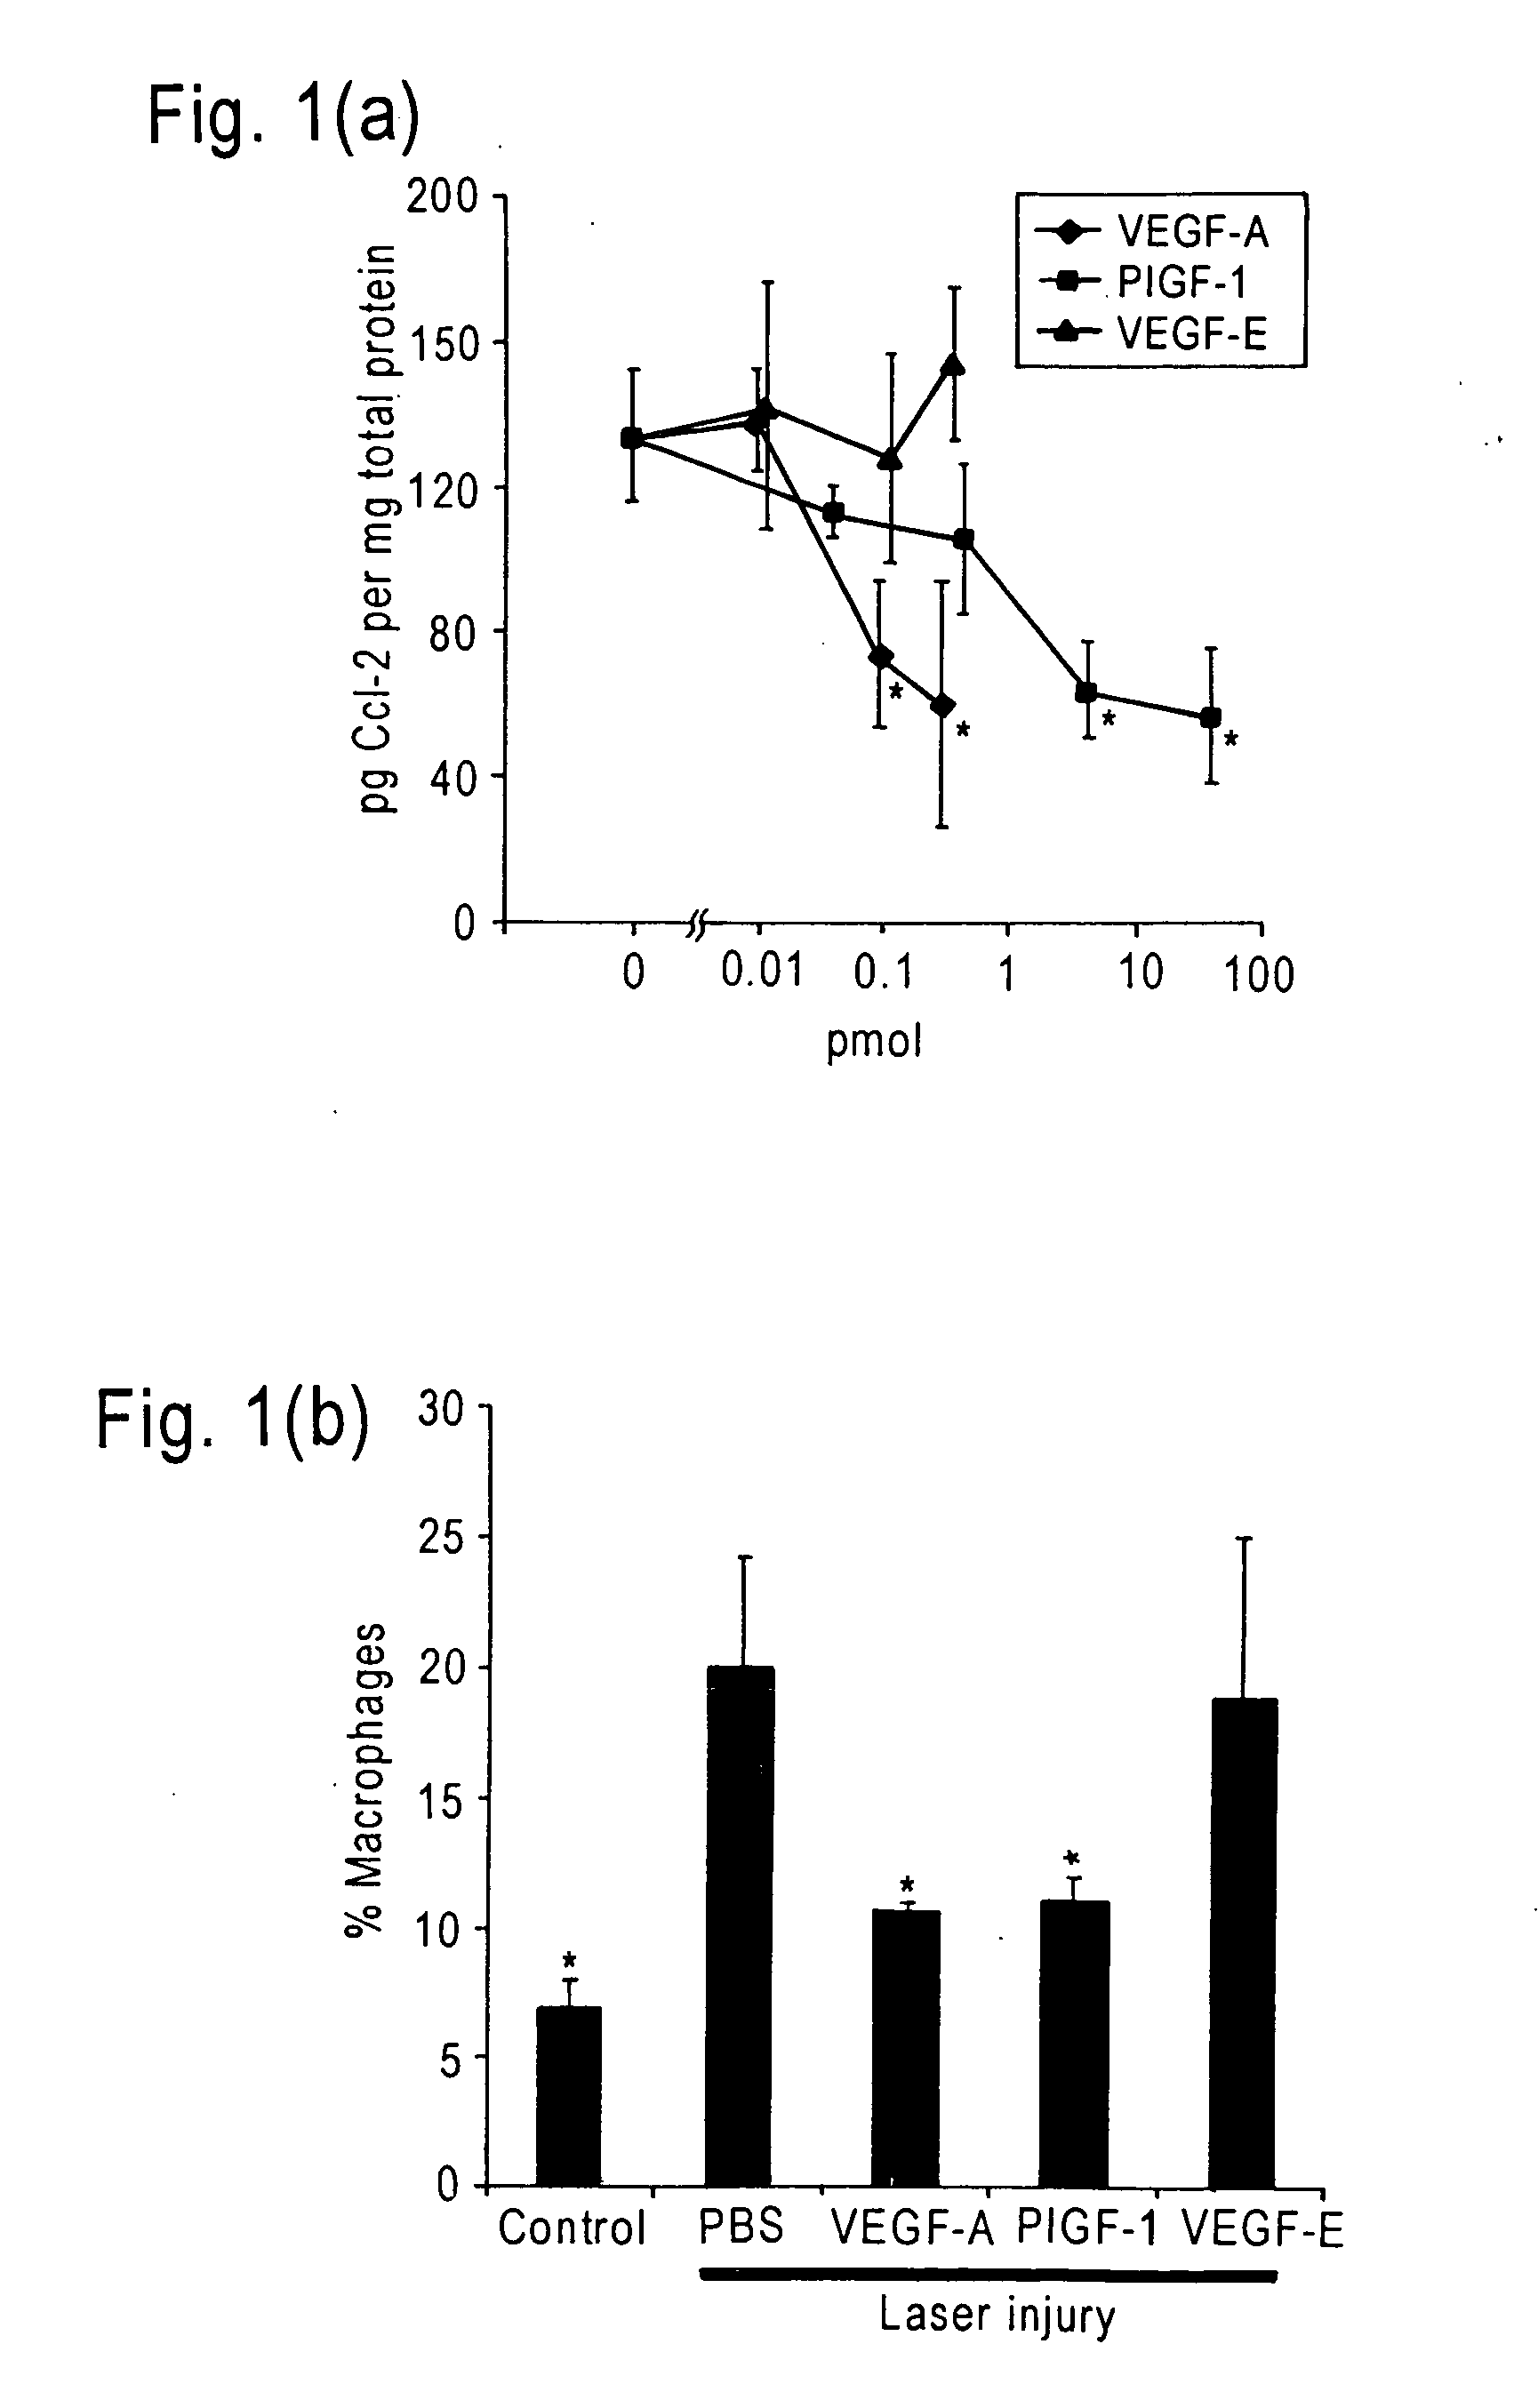 VEGF-A as an inhibitor of angiogenesis and methods of using same